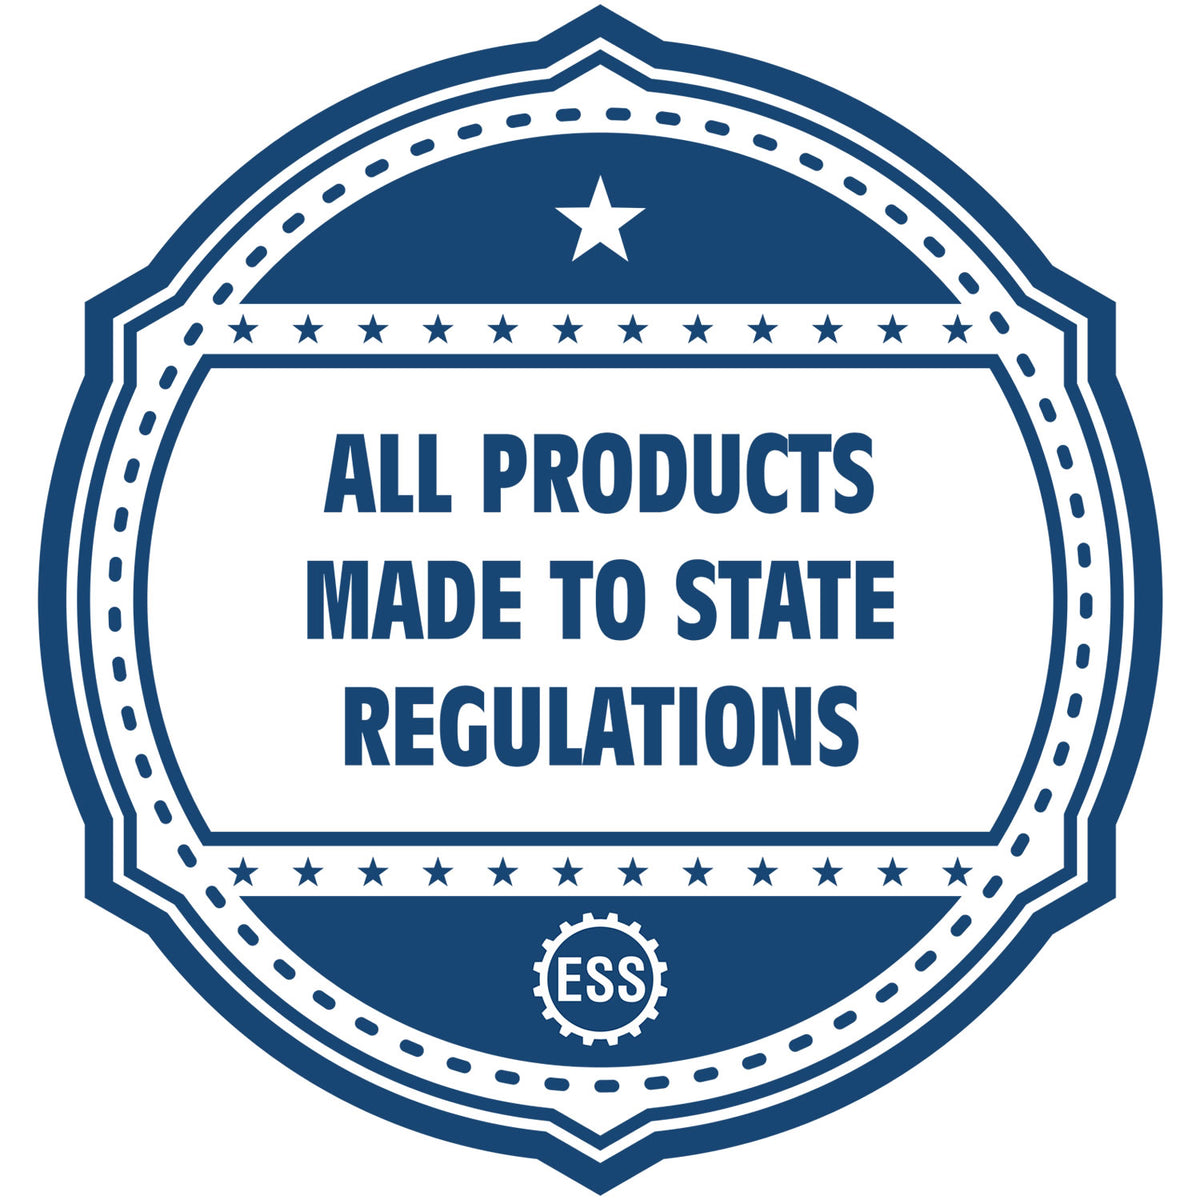 An icon or badge element for the Digital Nevada PE Stamp and Electronic Seal for Nevada Engineer showing that this product is made in compliance with state regulations.